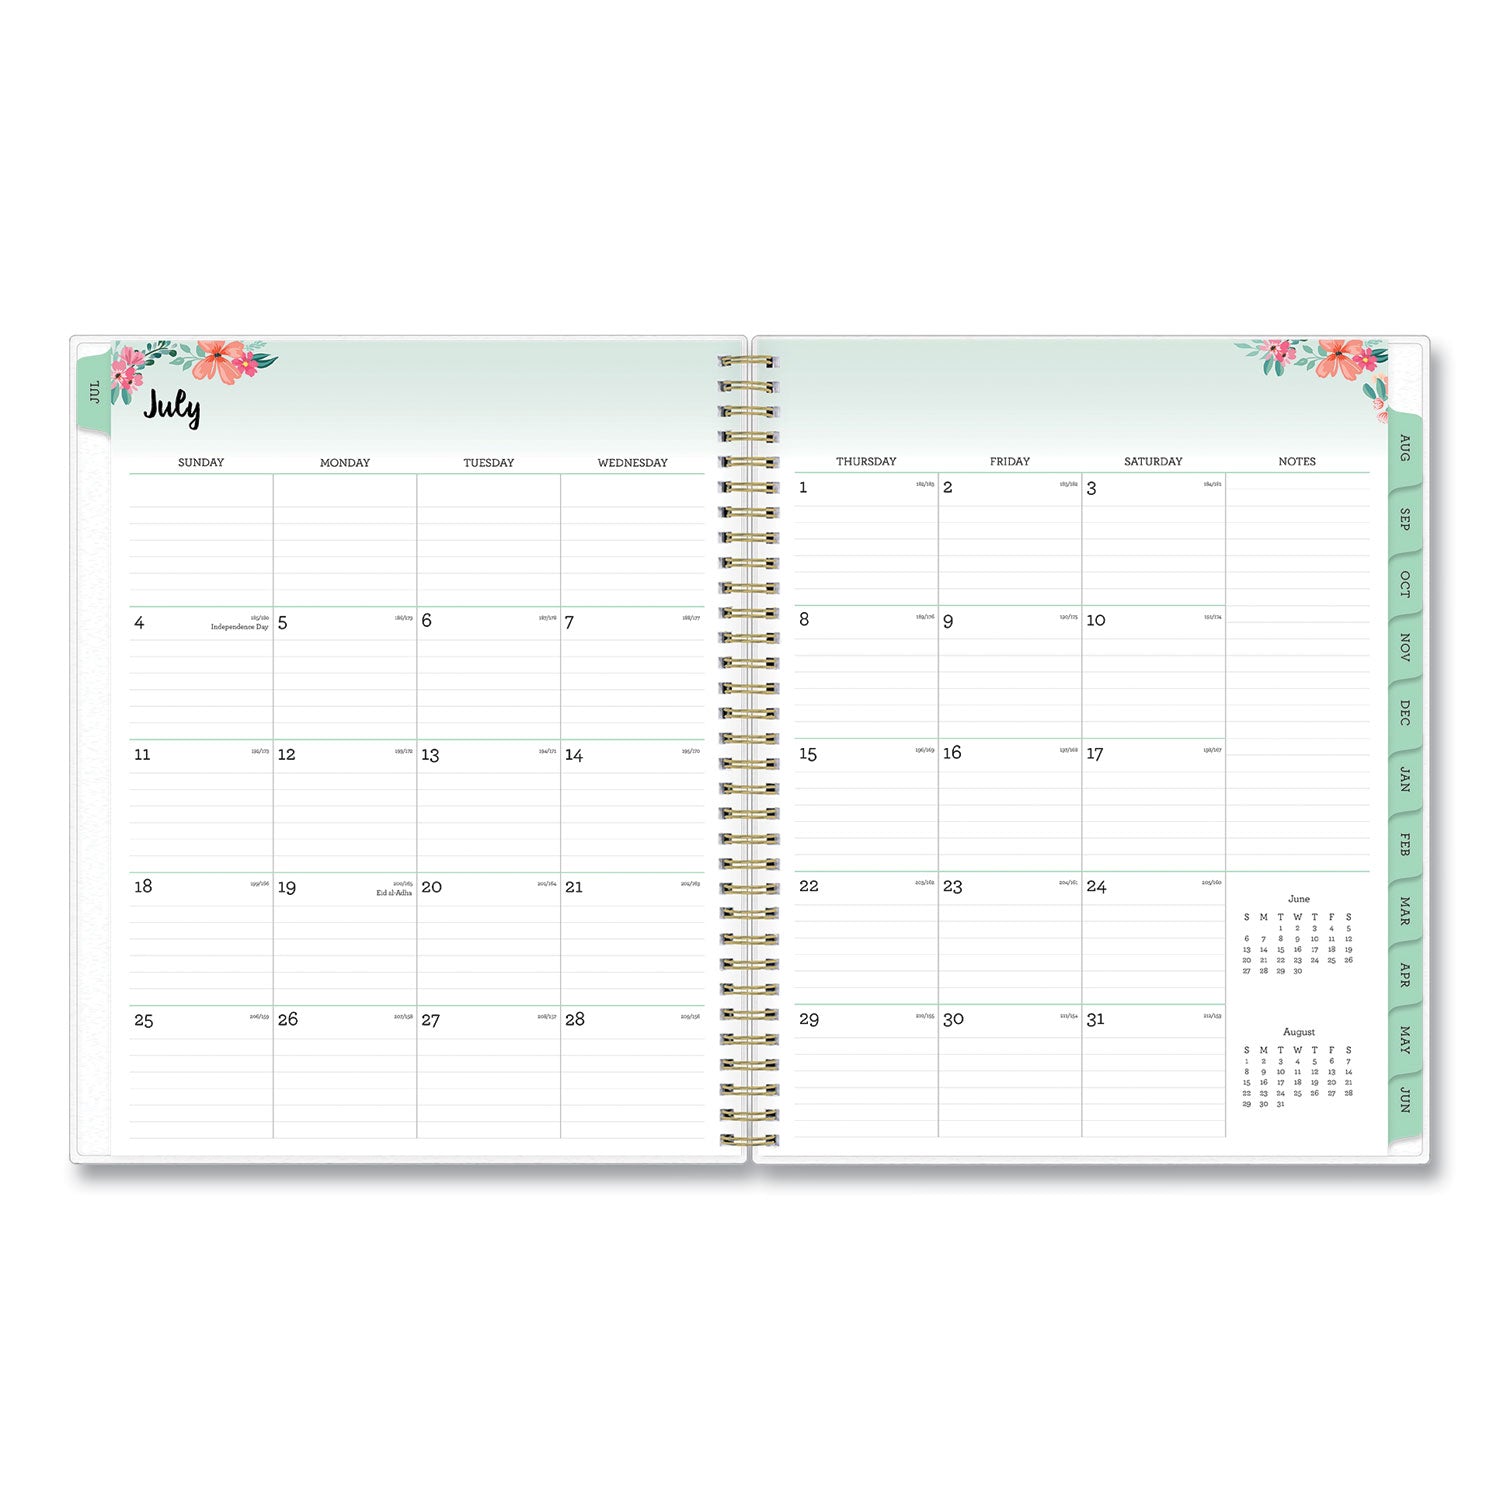 laurel-academic-year-weekly-monthly-planner-floral-artwork-11-x-85-green-pink-cover-12-month-july-june-2021-2022_bls131947 - 3